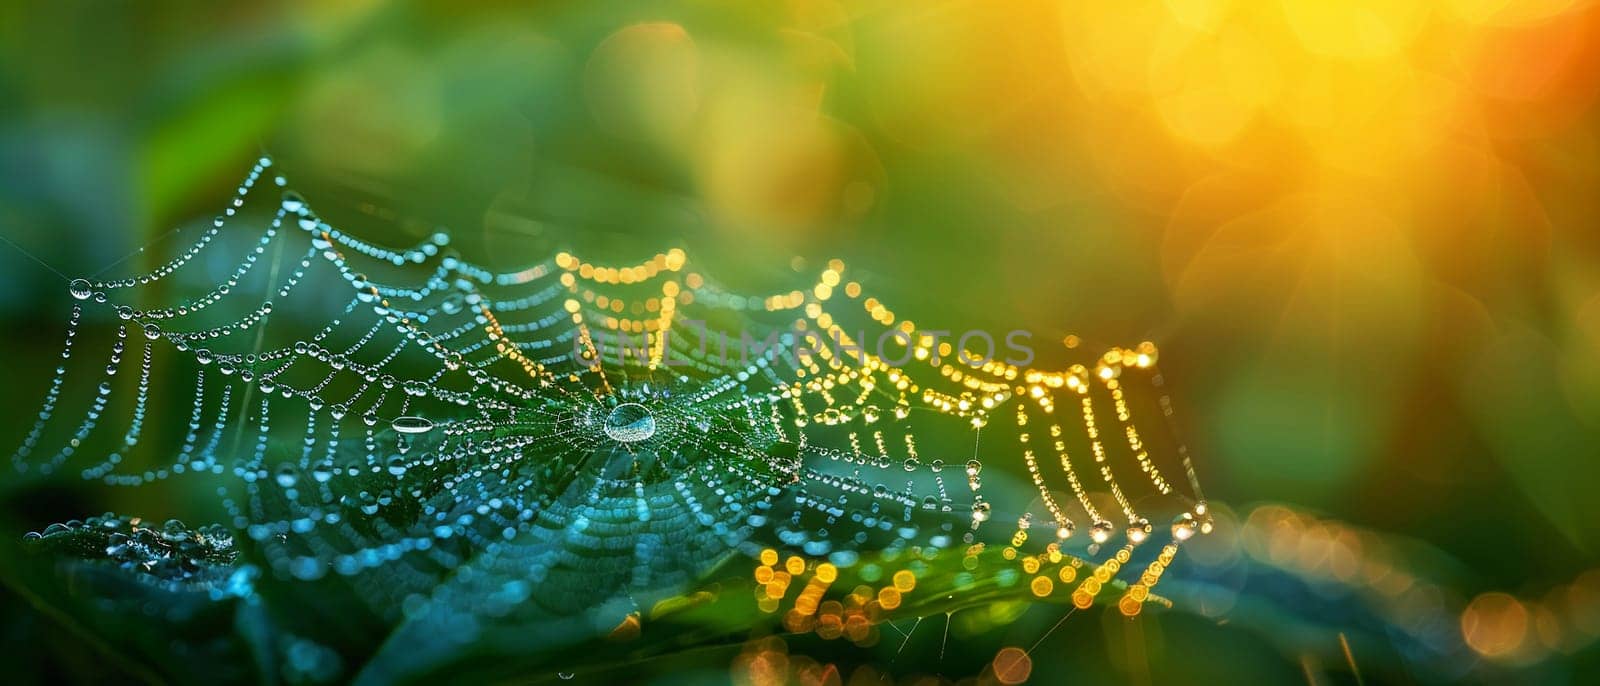 Close-up of water droplets on a spider web, illustrating nature's delicate balance.